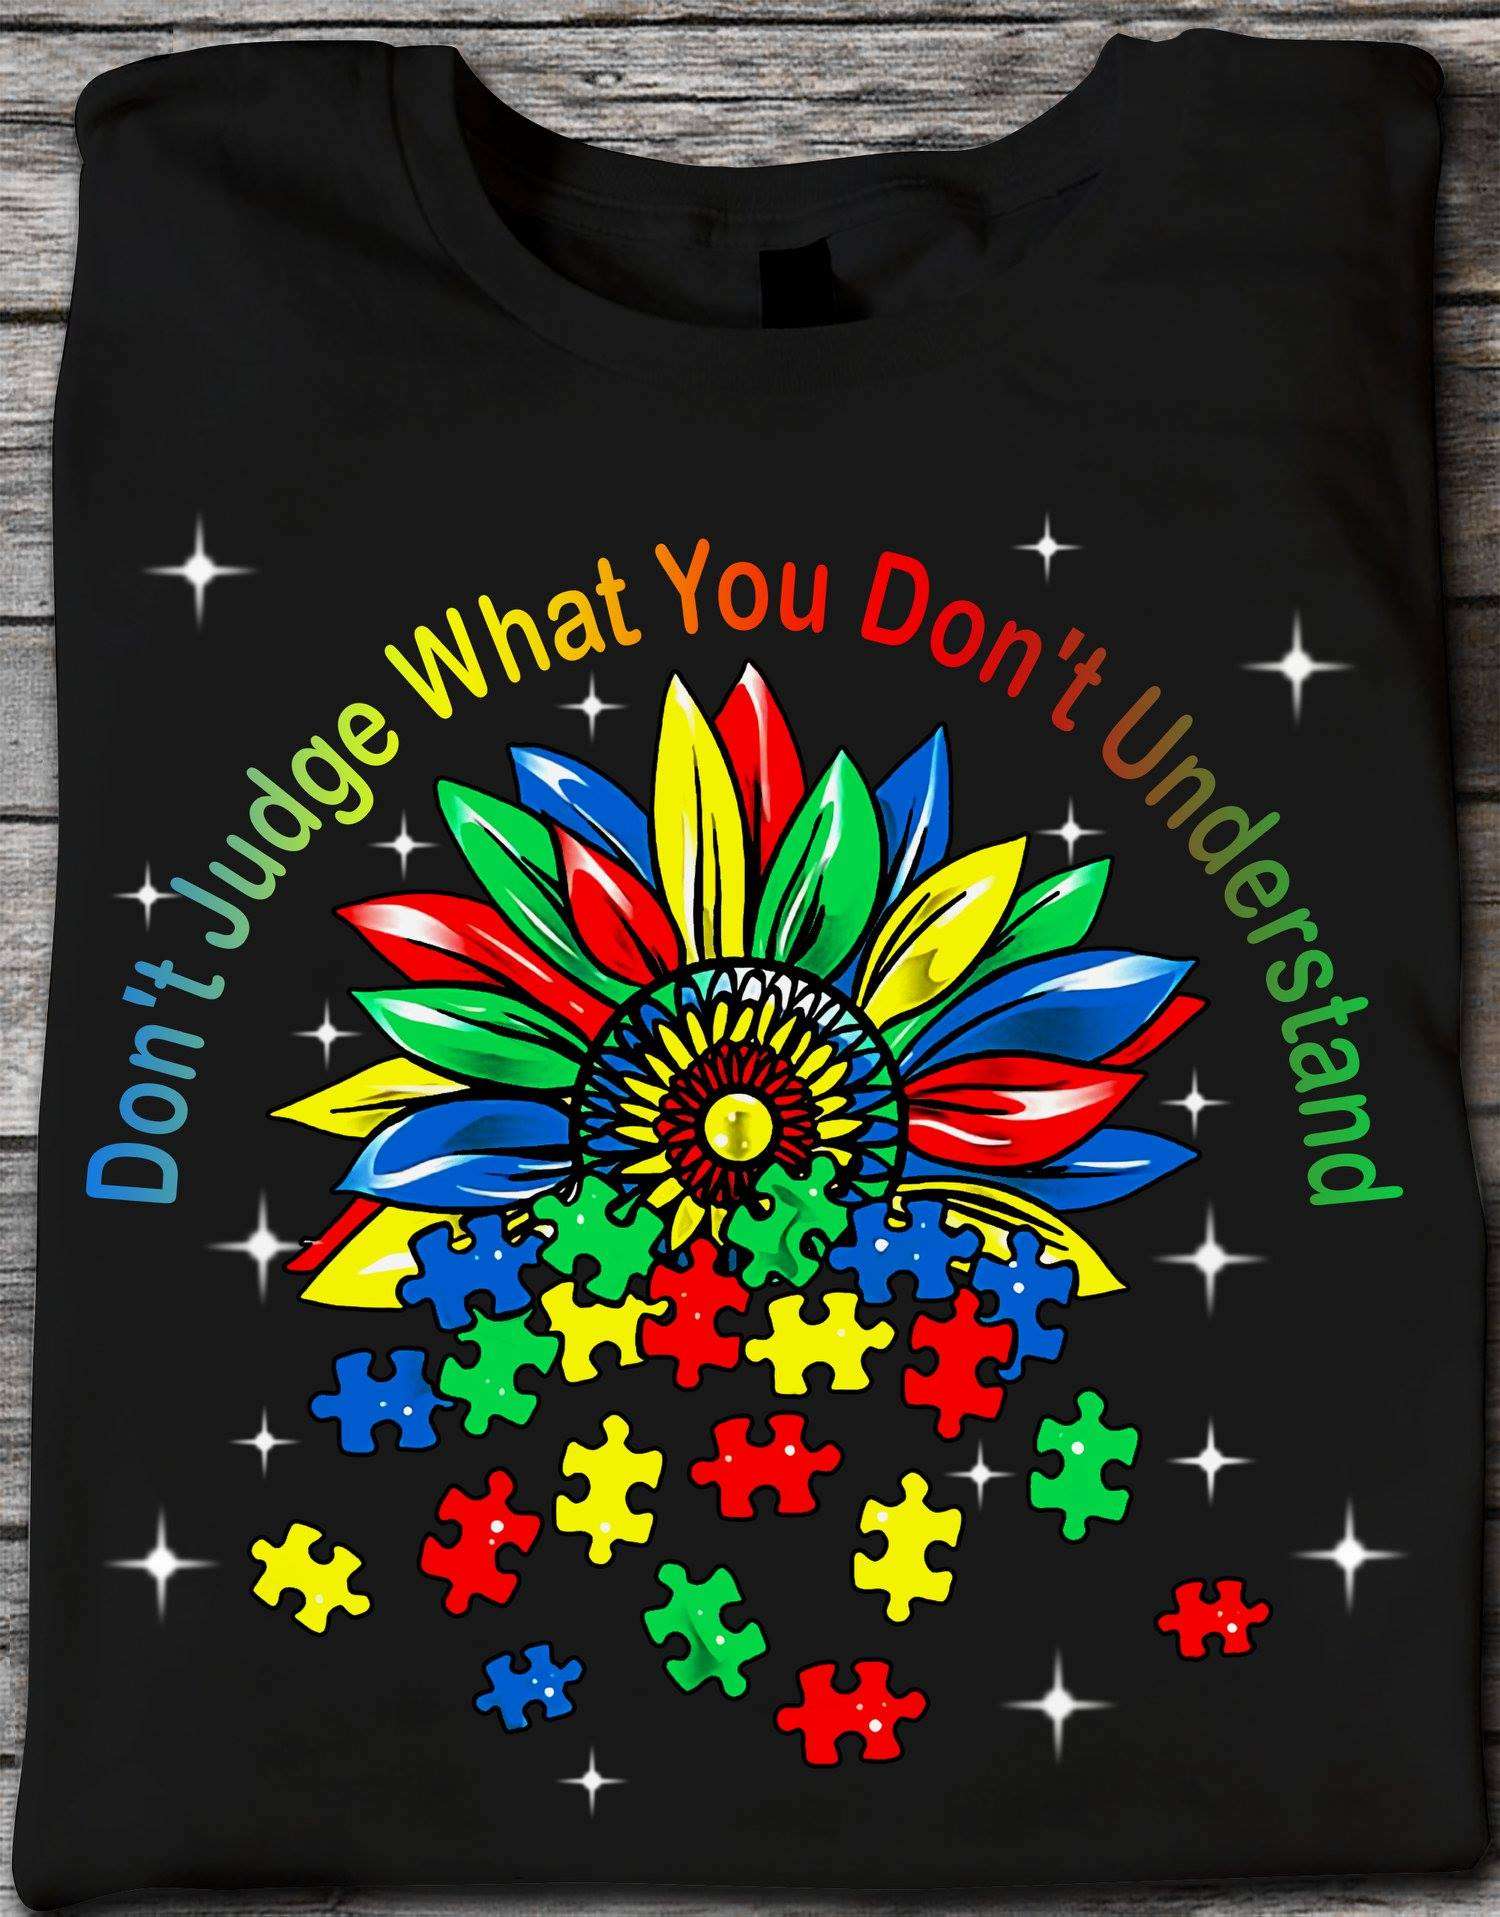 Don't judge what you don't understand - Autism awareness, autism puzzle signal